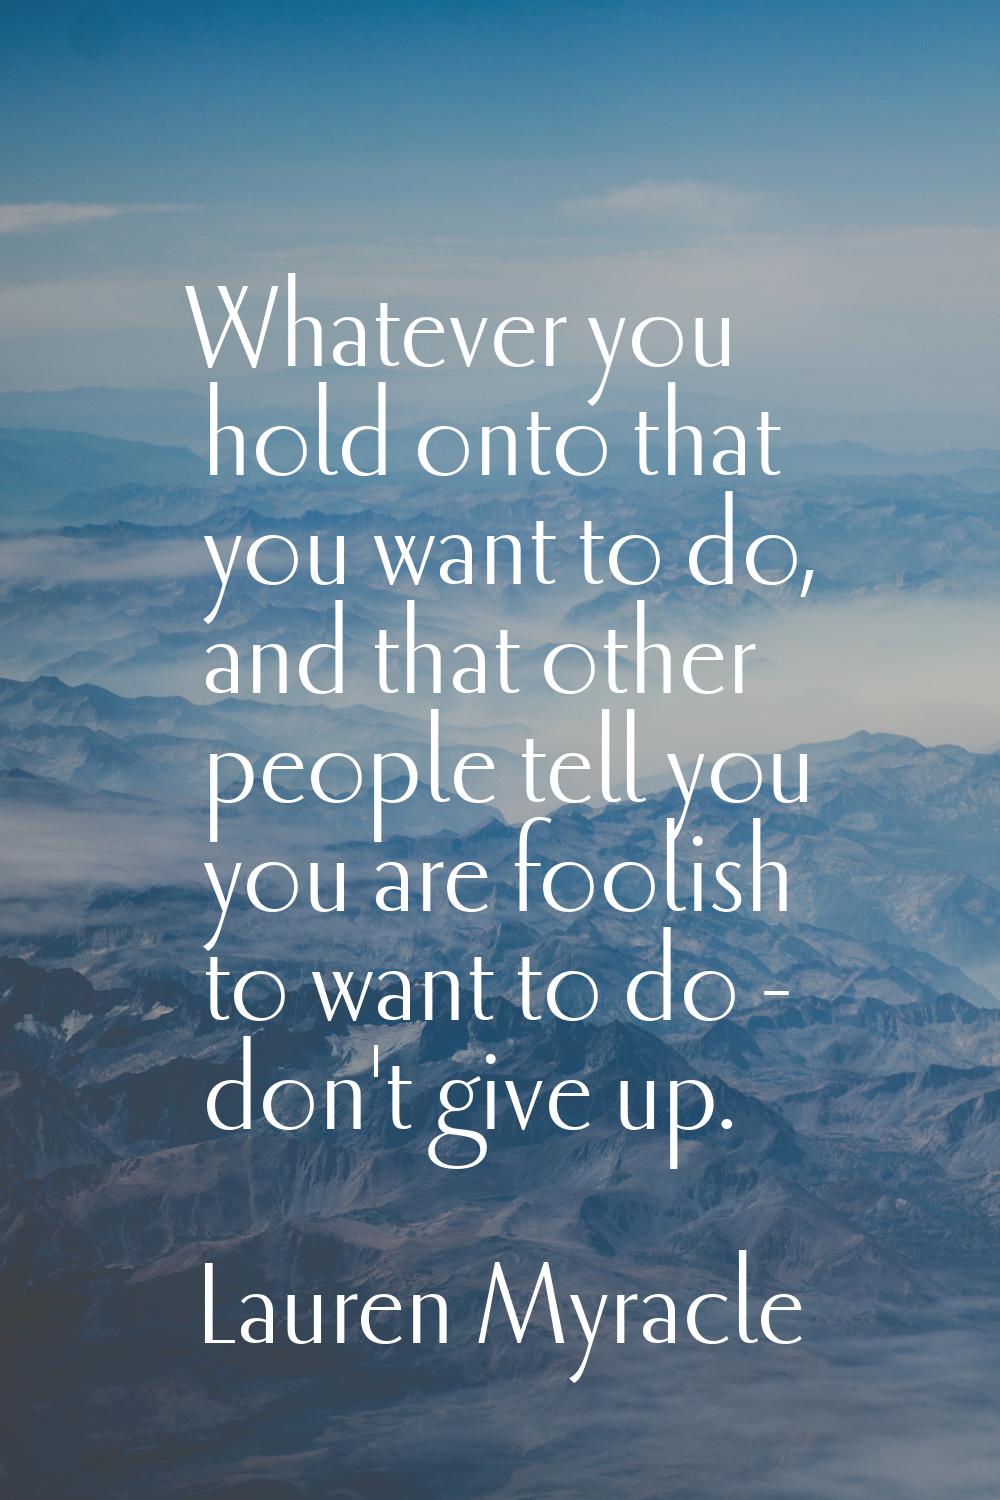 Whatever you hold onto that you want to do, and that other people tell you you are foolish to want 